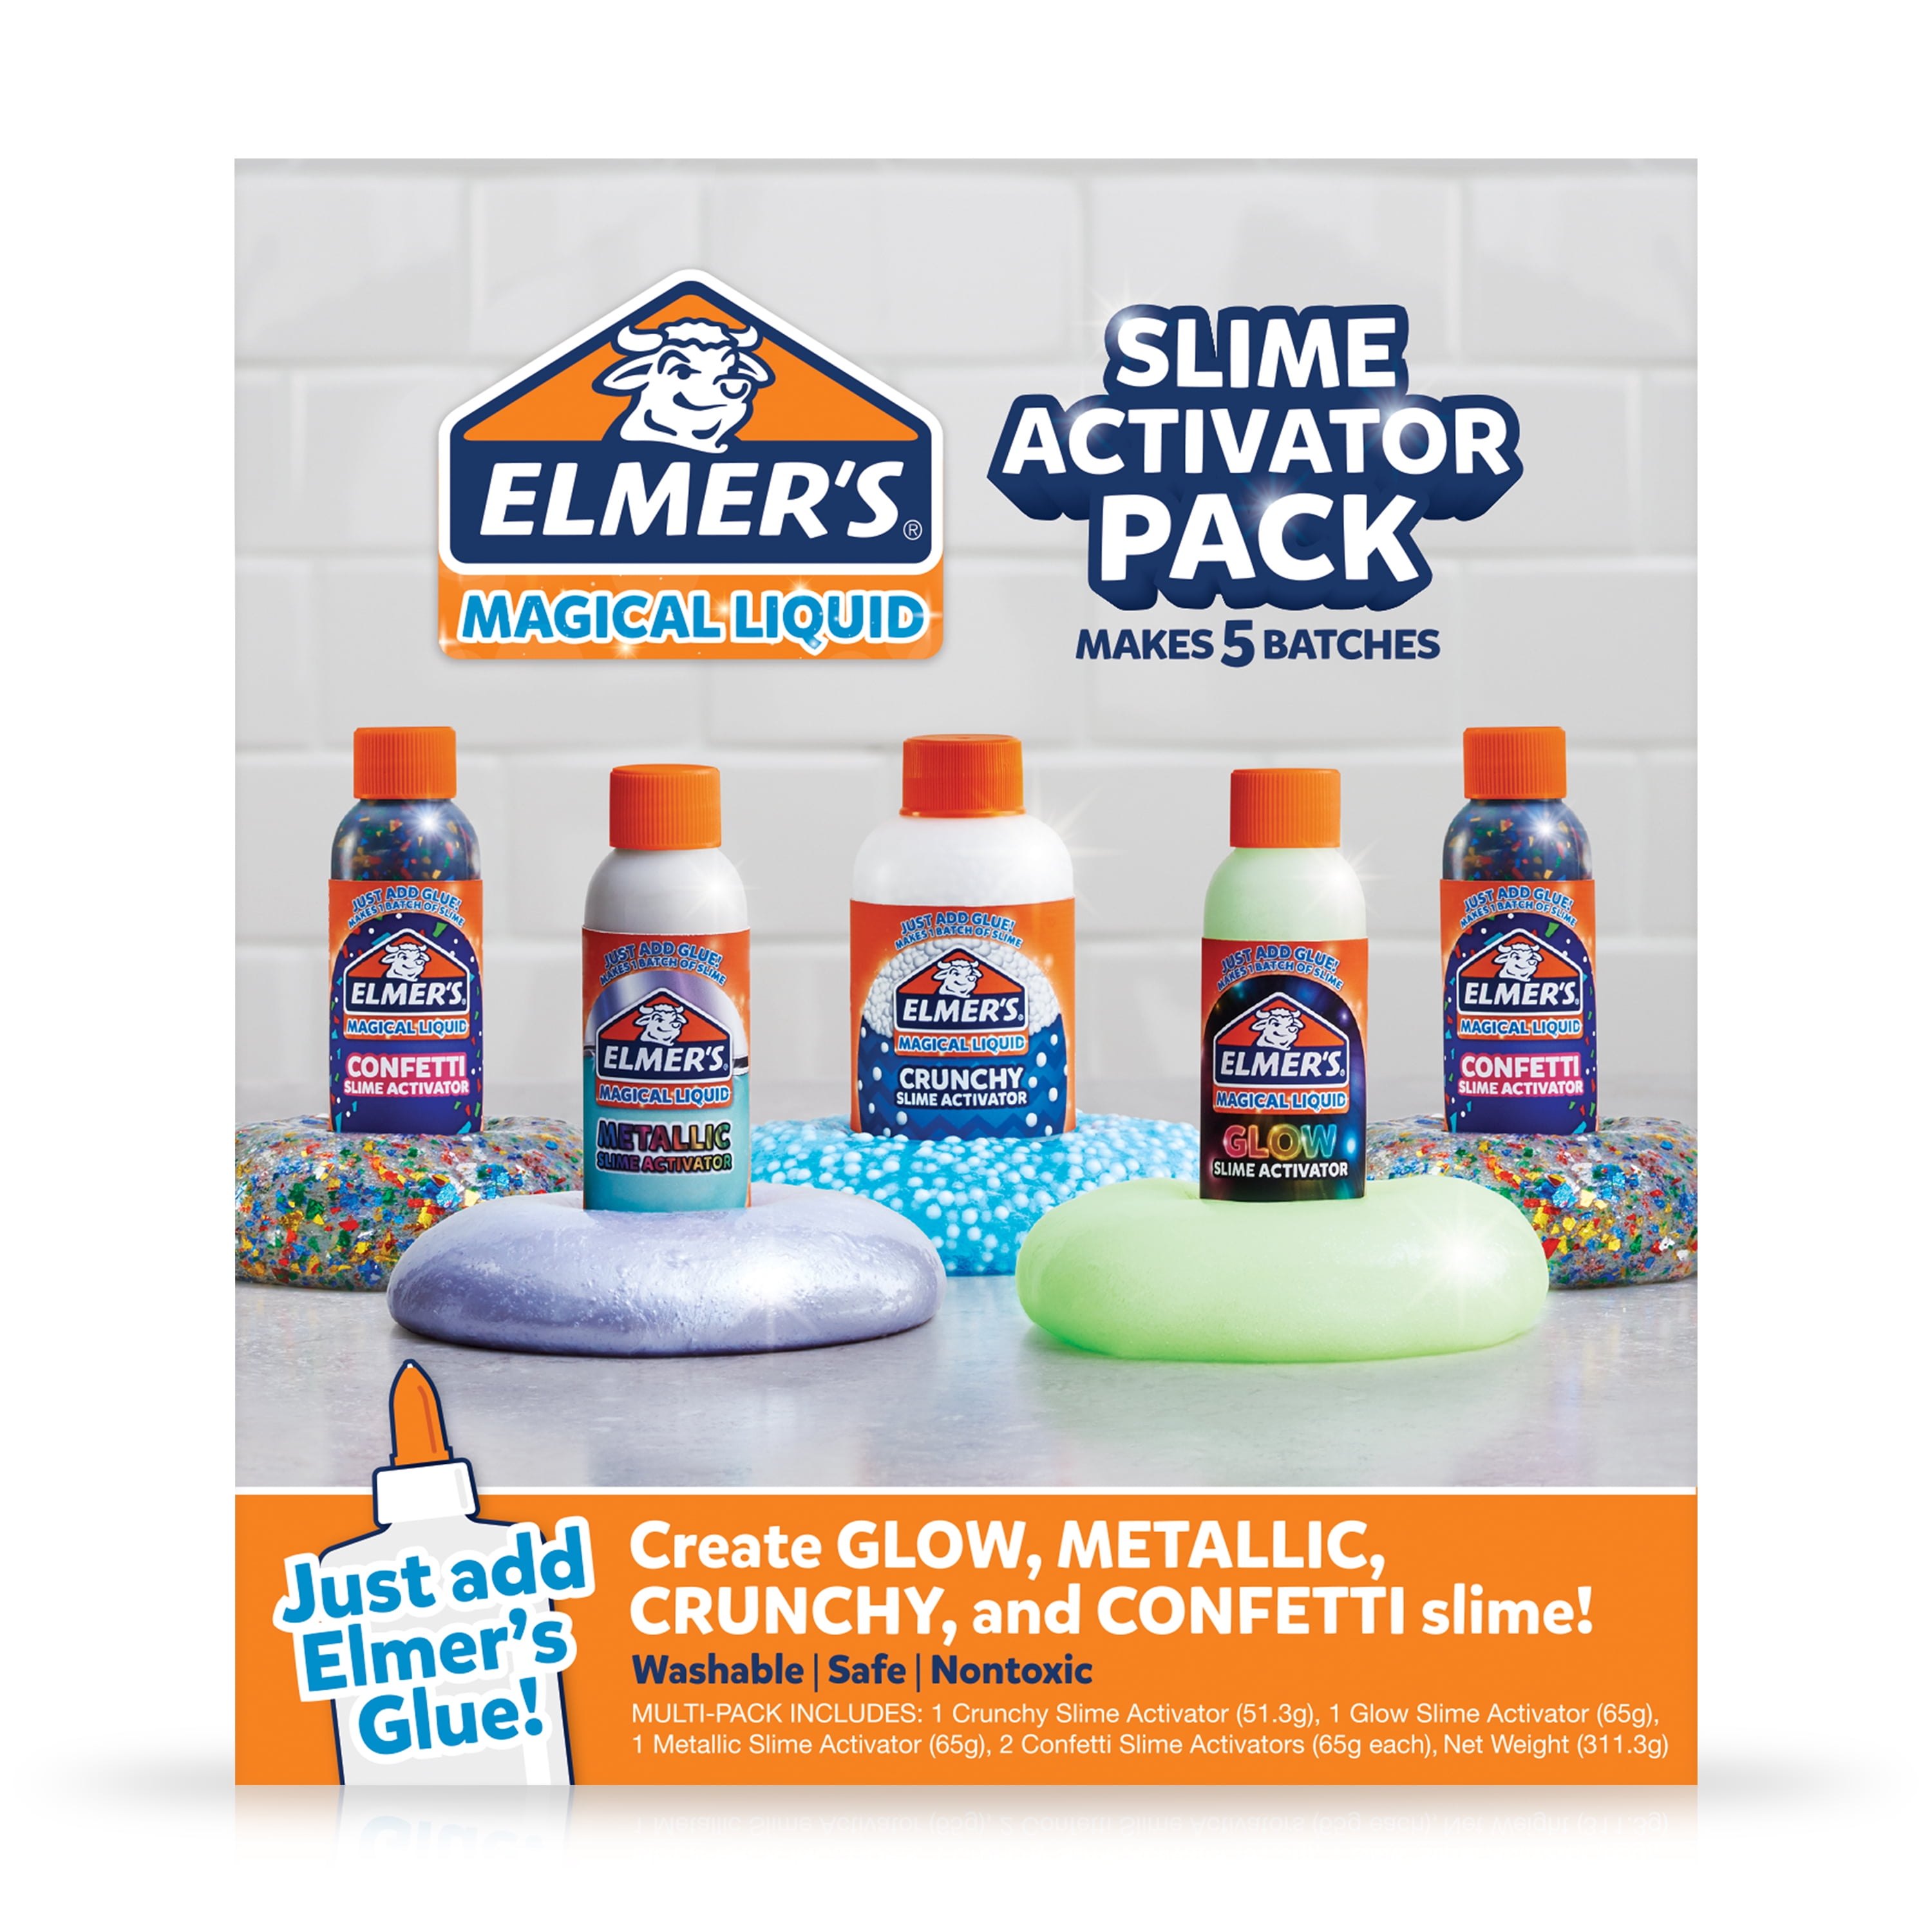 Elmer's Slime Activator Variety Pack | Magical Liquid Glue Slime Activator,  5 Count